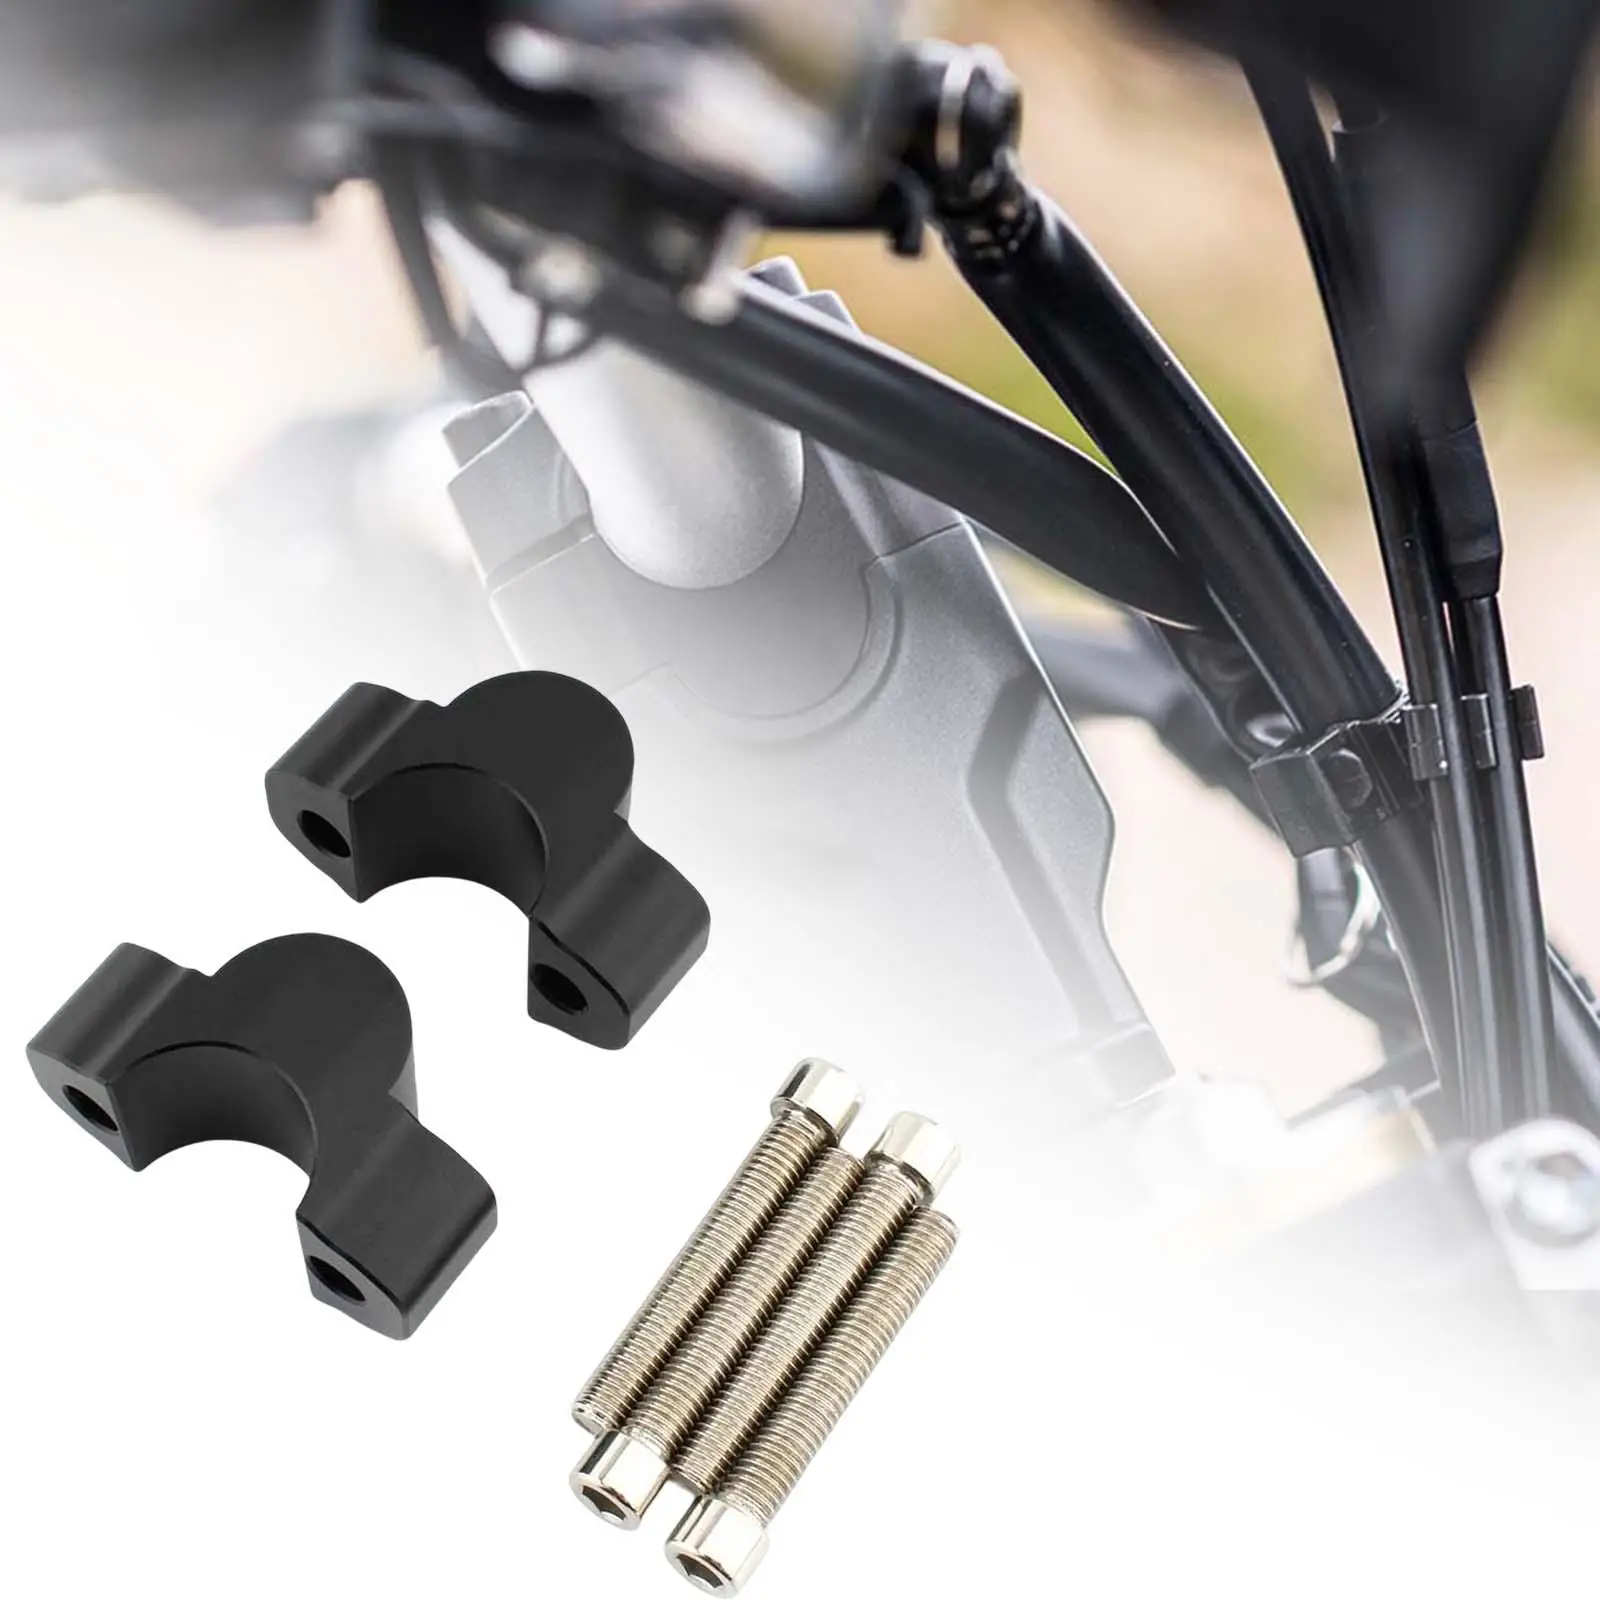 Handlebar Risers Mount Clamp Clamp Mount Adapter Mount Riser Clamps for Tenere 700 Xtz 700 Durable Replacement Easy to Install